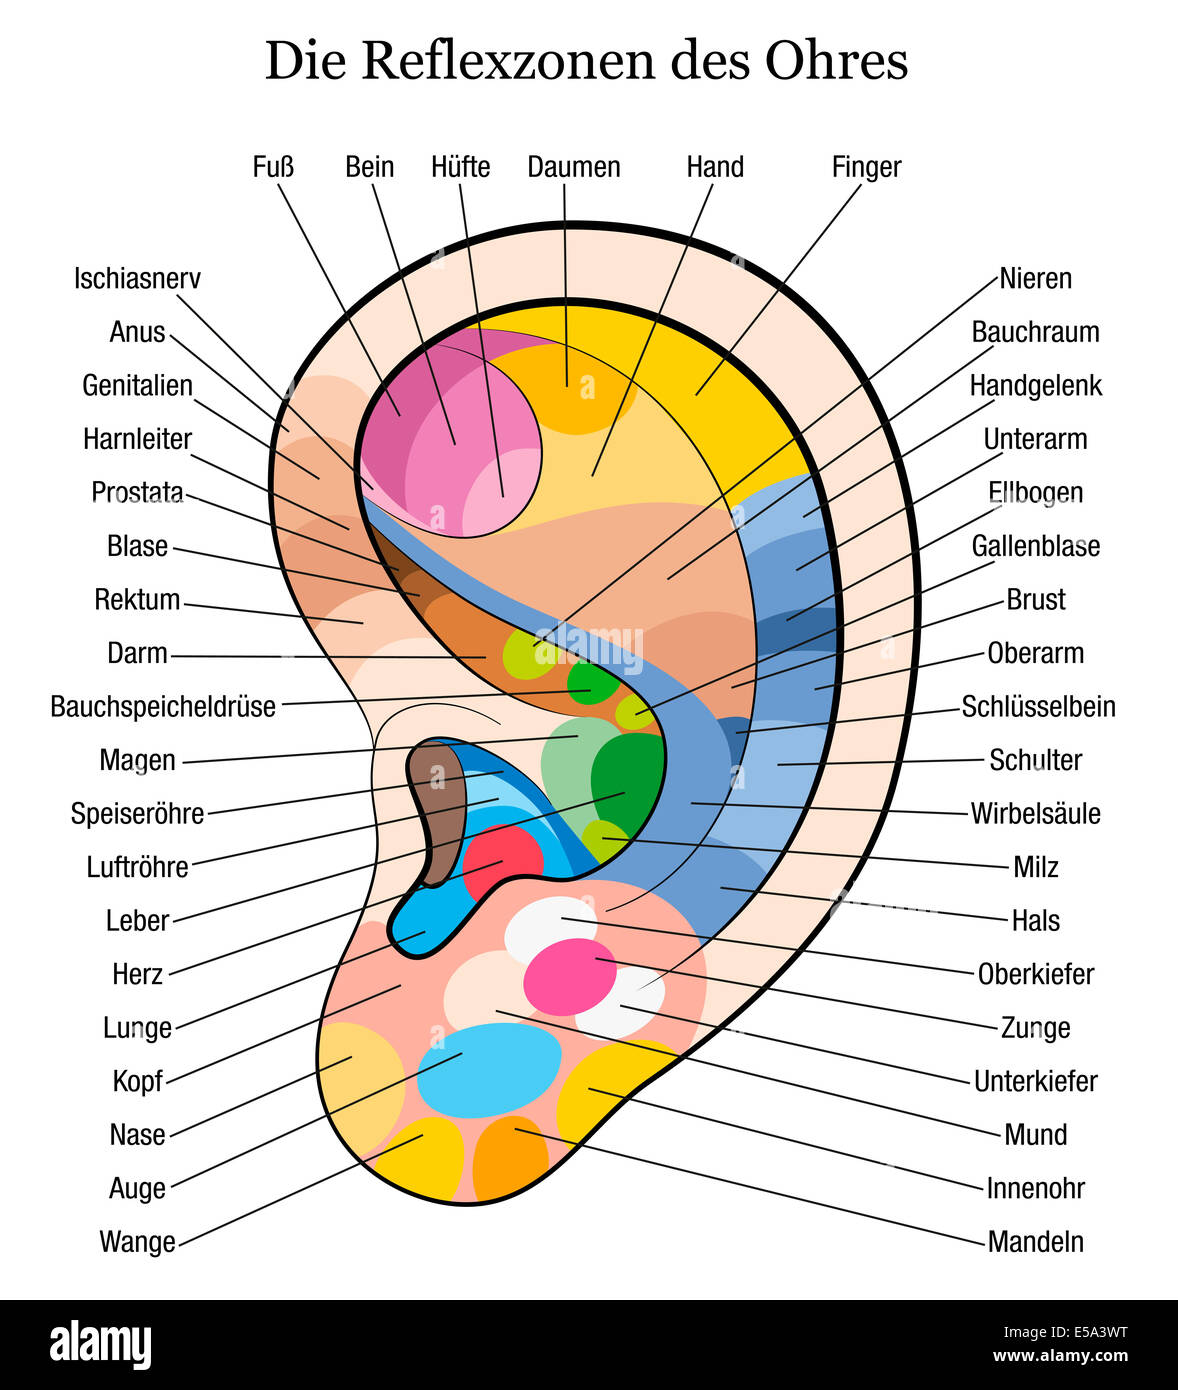 Ear reflexology chart with accurate description of the corresponding internal organs and body parts. German Labeling! Stock Photo